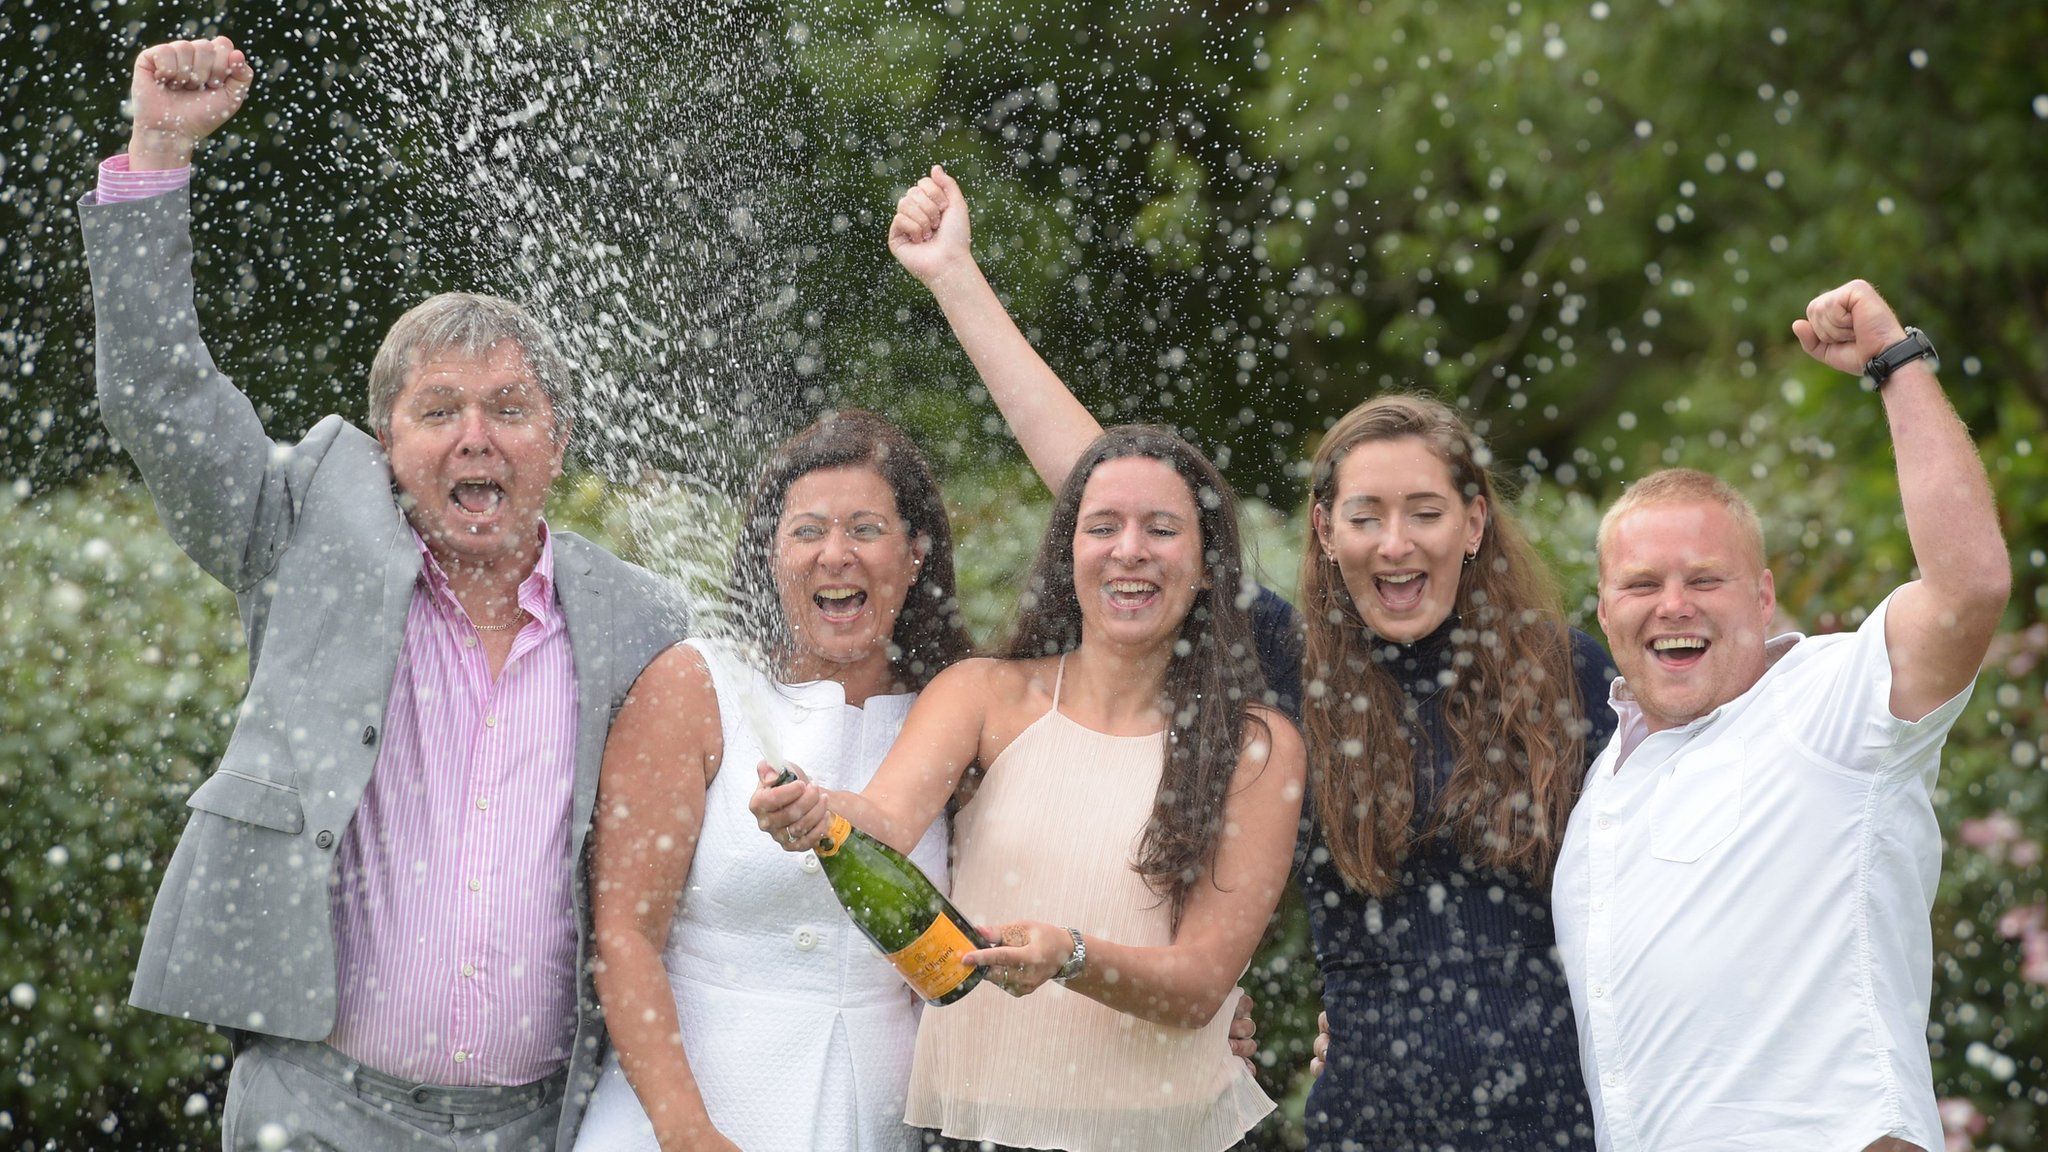 The family of five celebrating winning the EuroMillions